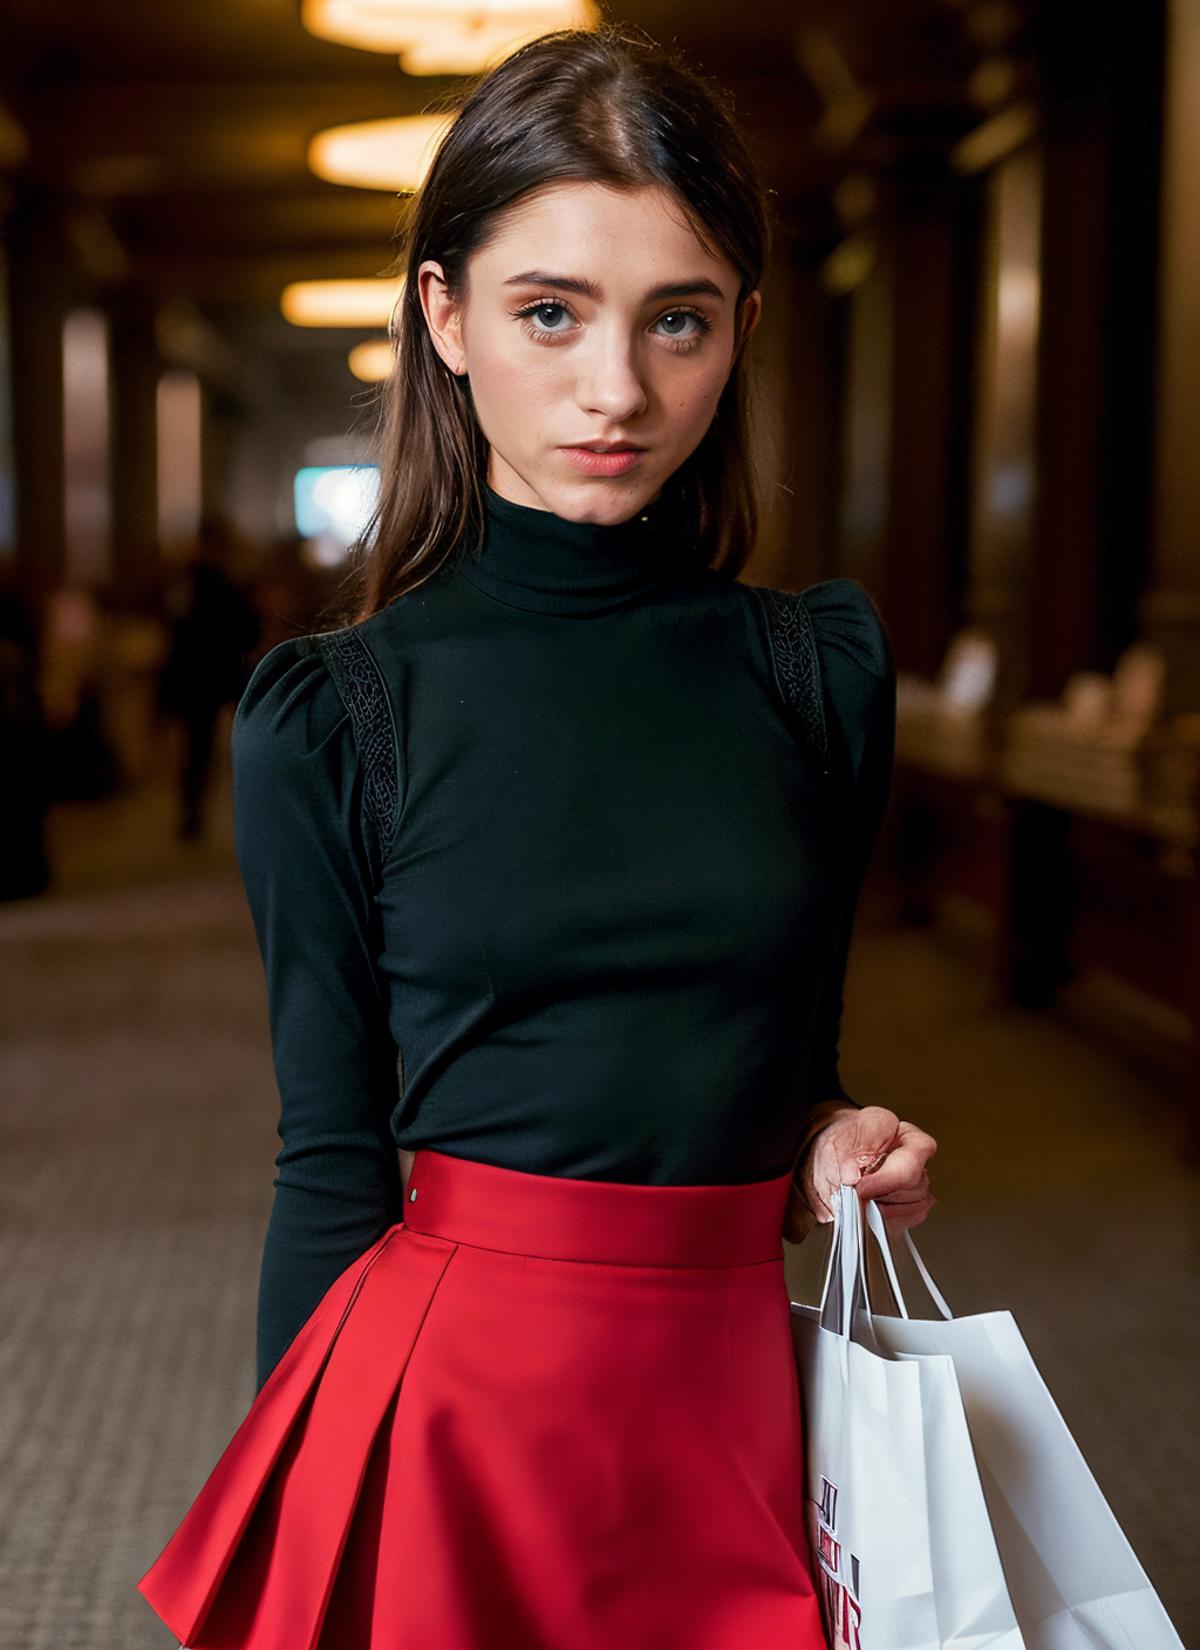 Natalia Dyer (Nancy Wheeler from Stranger Things TV show) image by wensleyp01